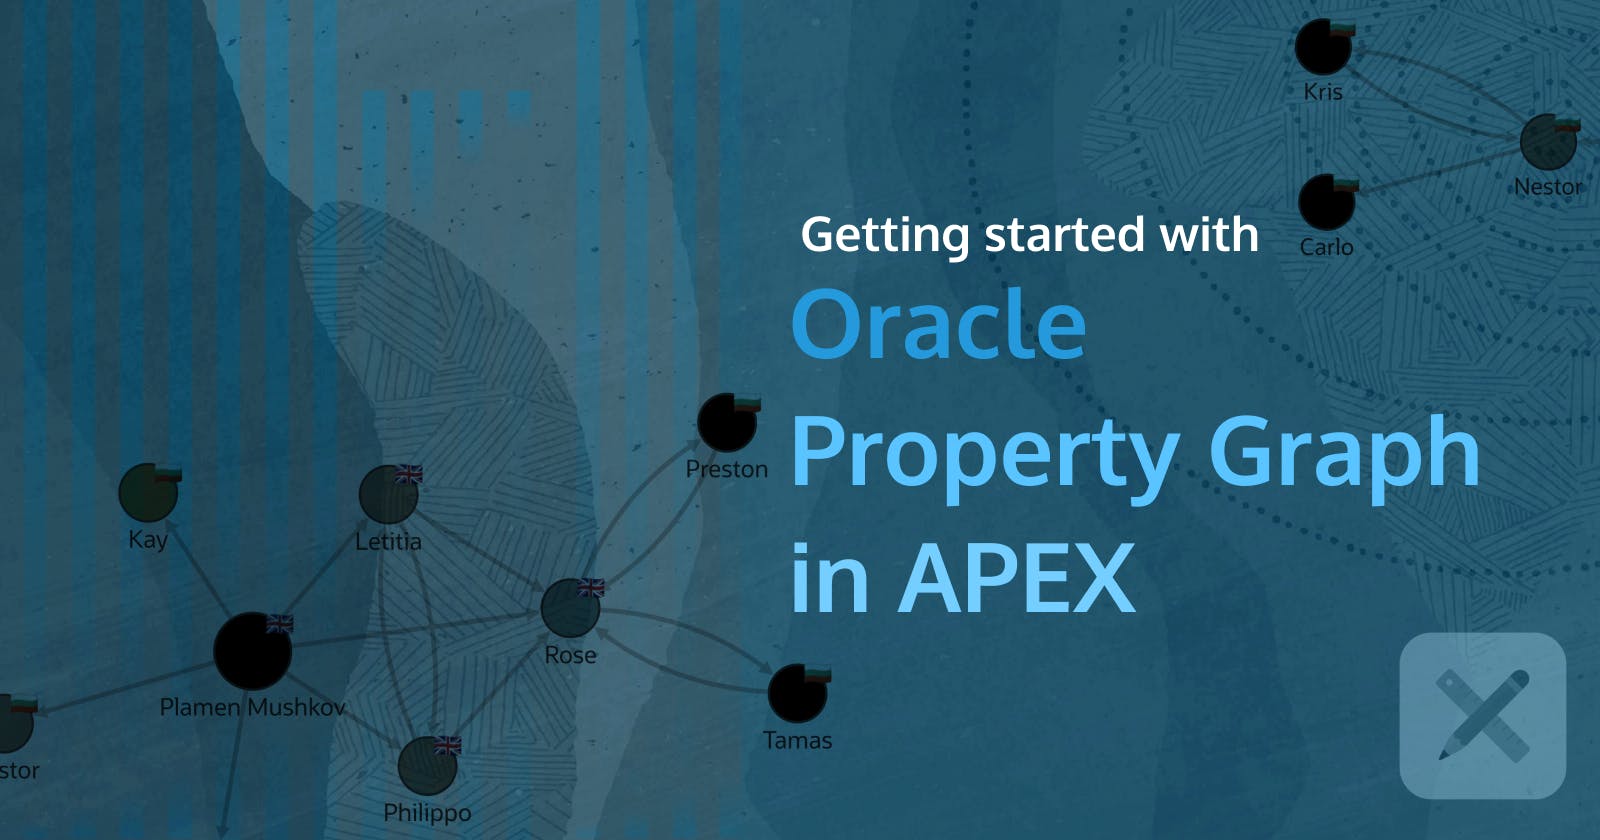 Getting started with Oracle Property Graph in APEX